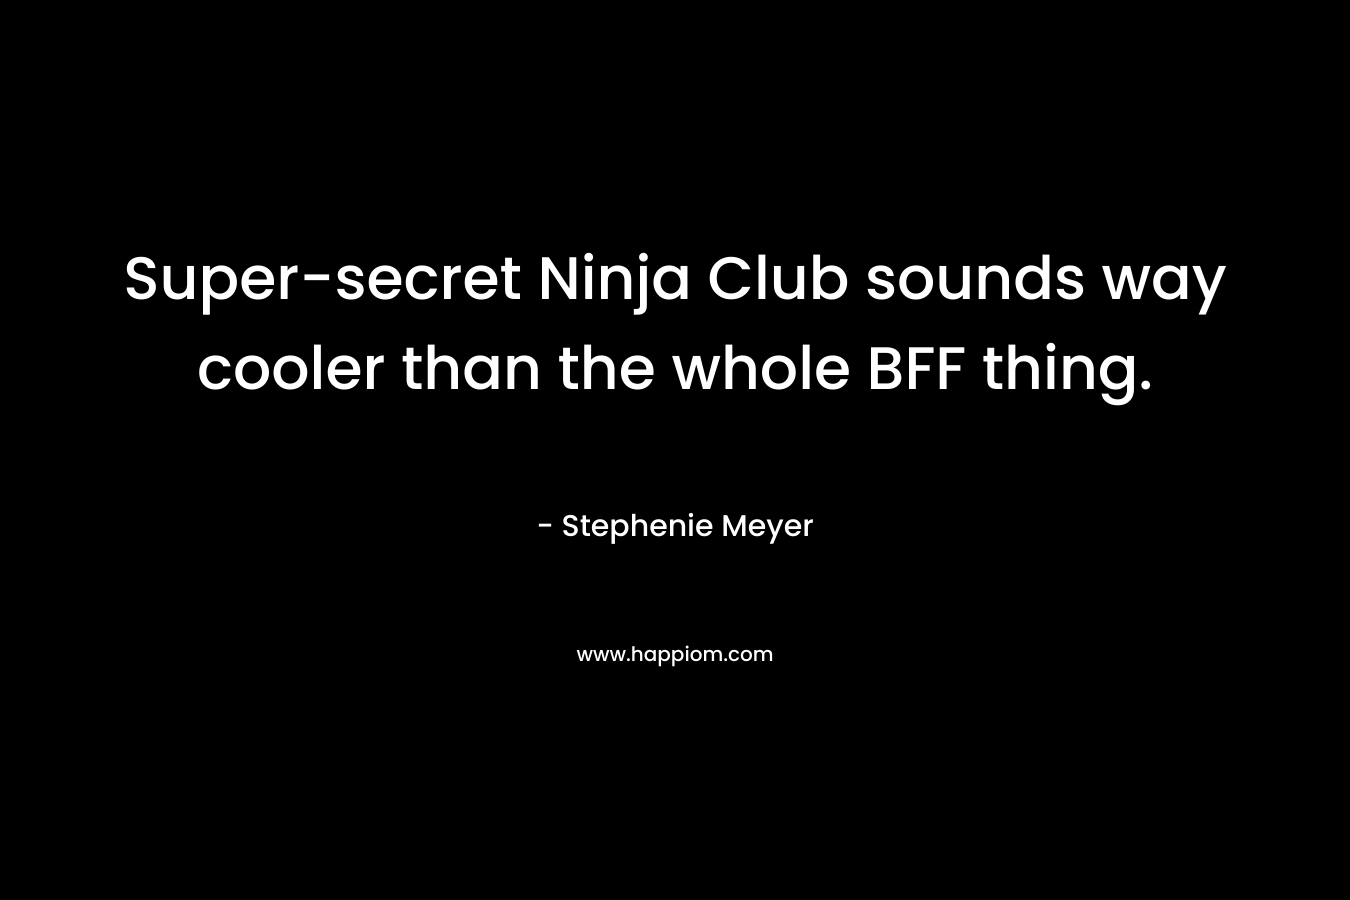 Super-secret Ninja Club sounds way cooler than the whole BFF thing. – Stephenie Meyer